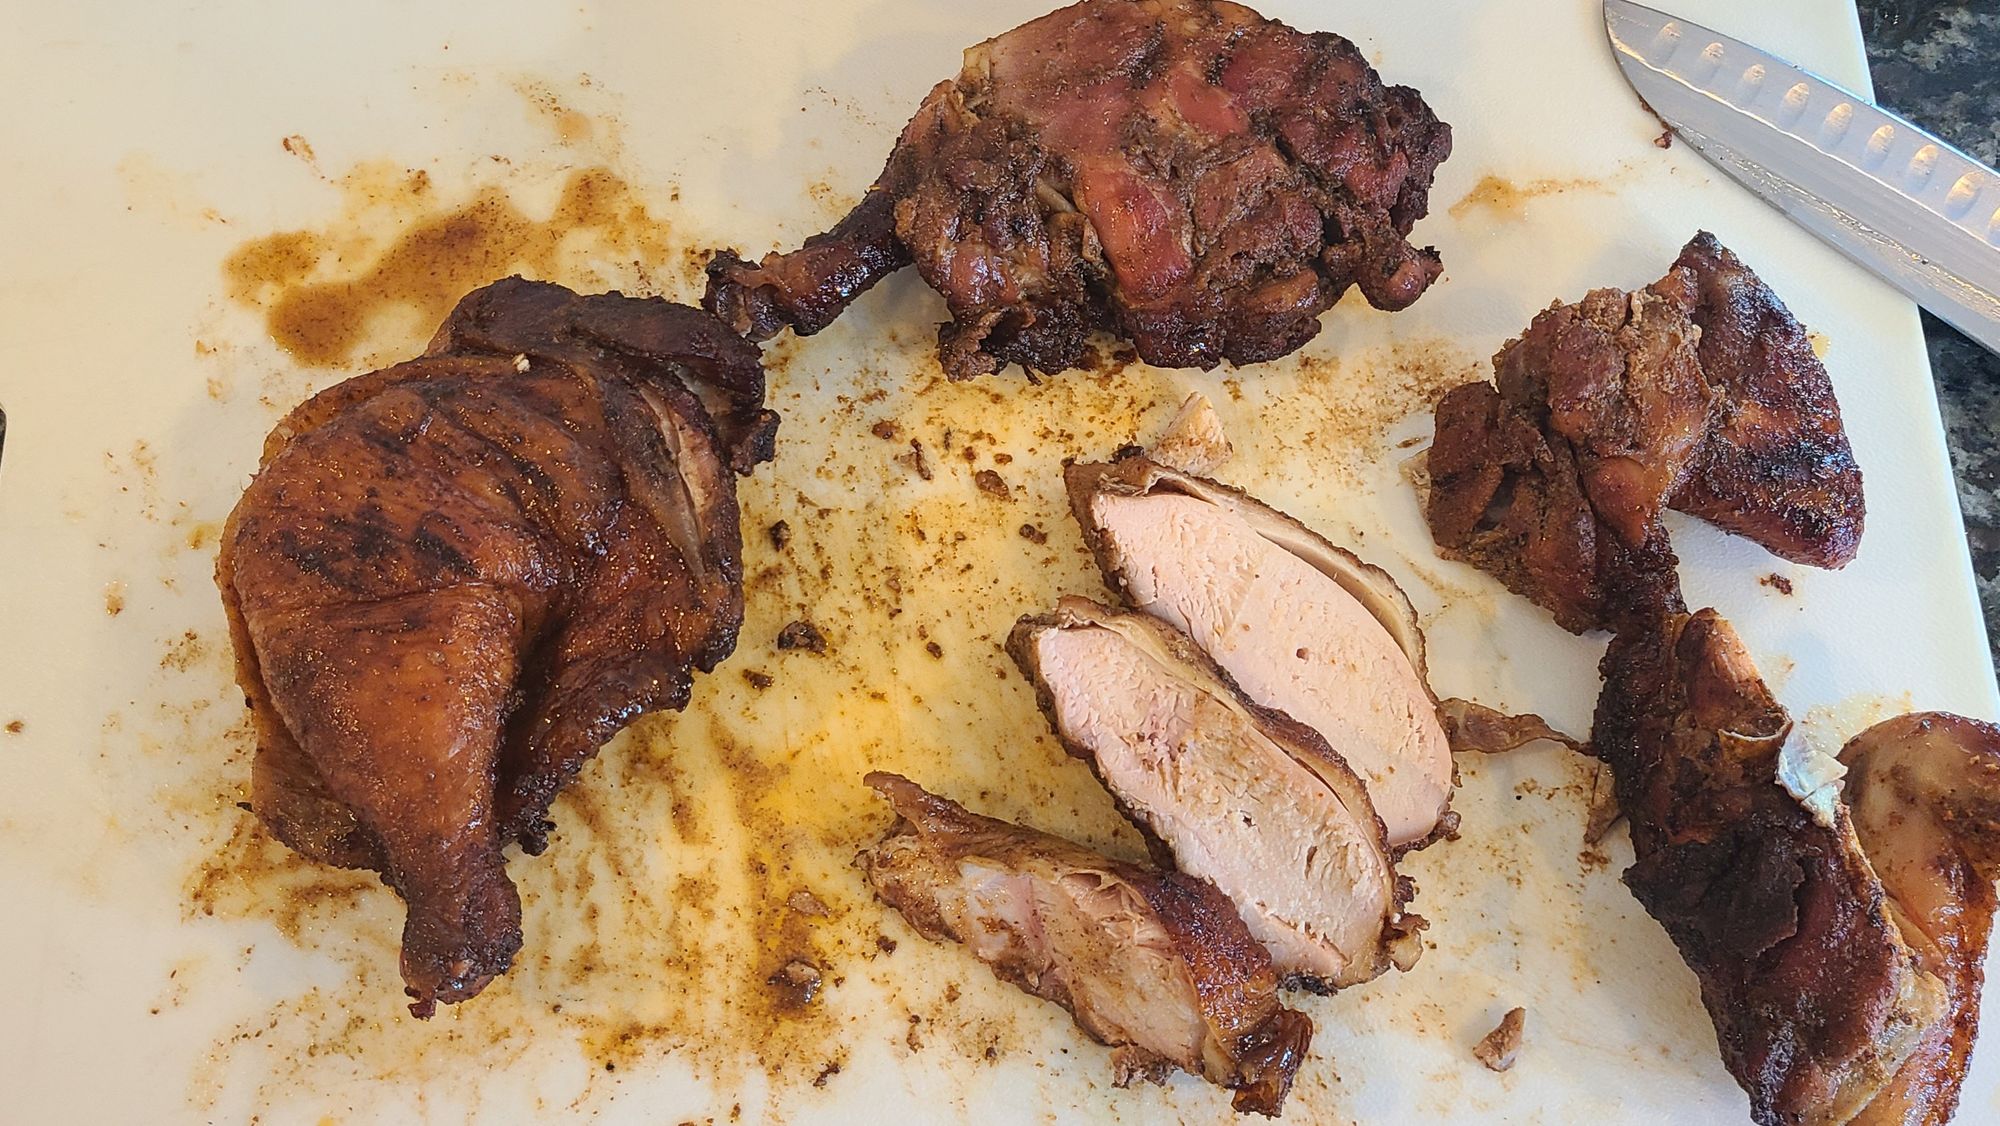 Applewood and Mesquite Smoked Spatchcock Chicken